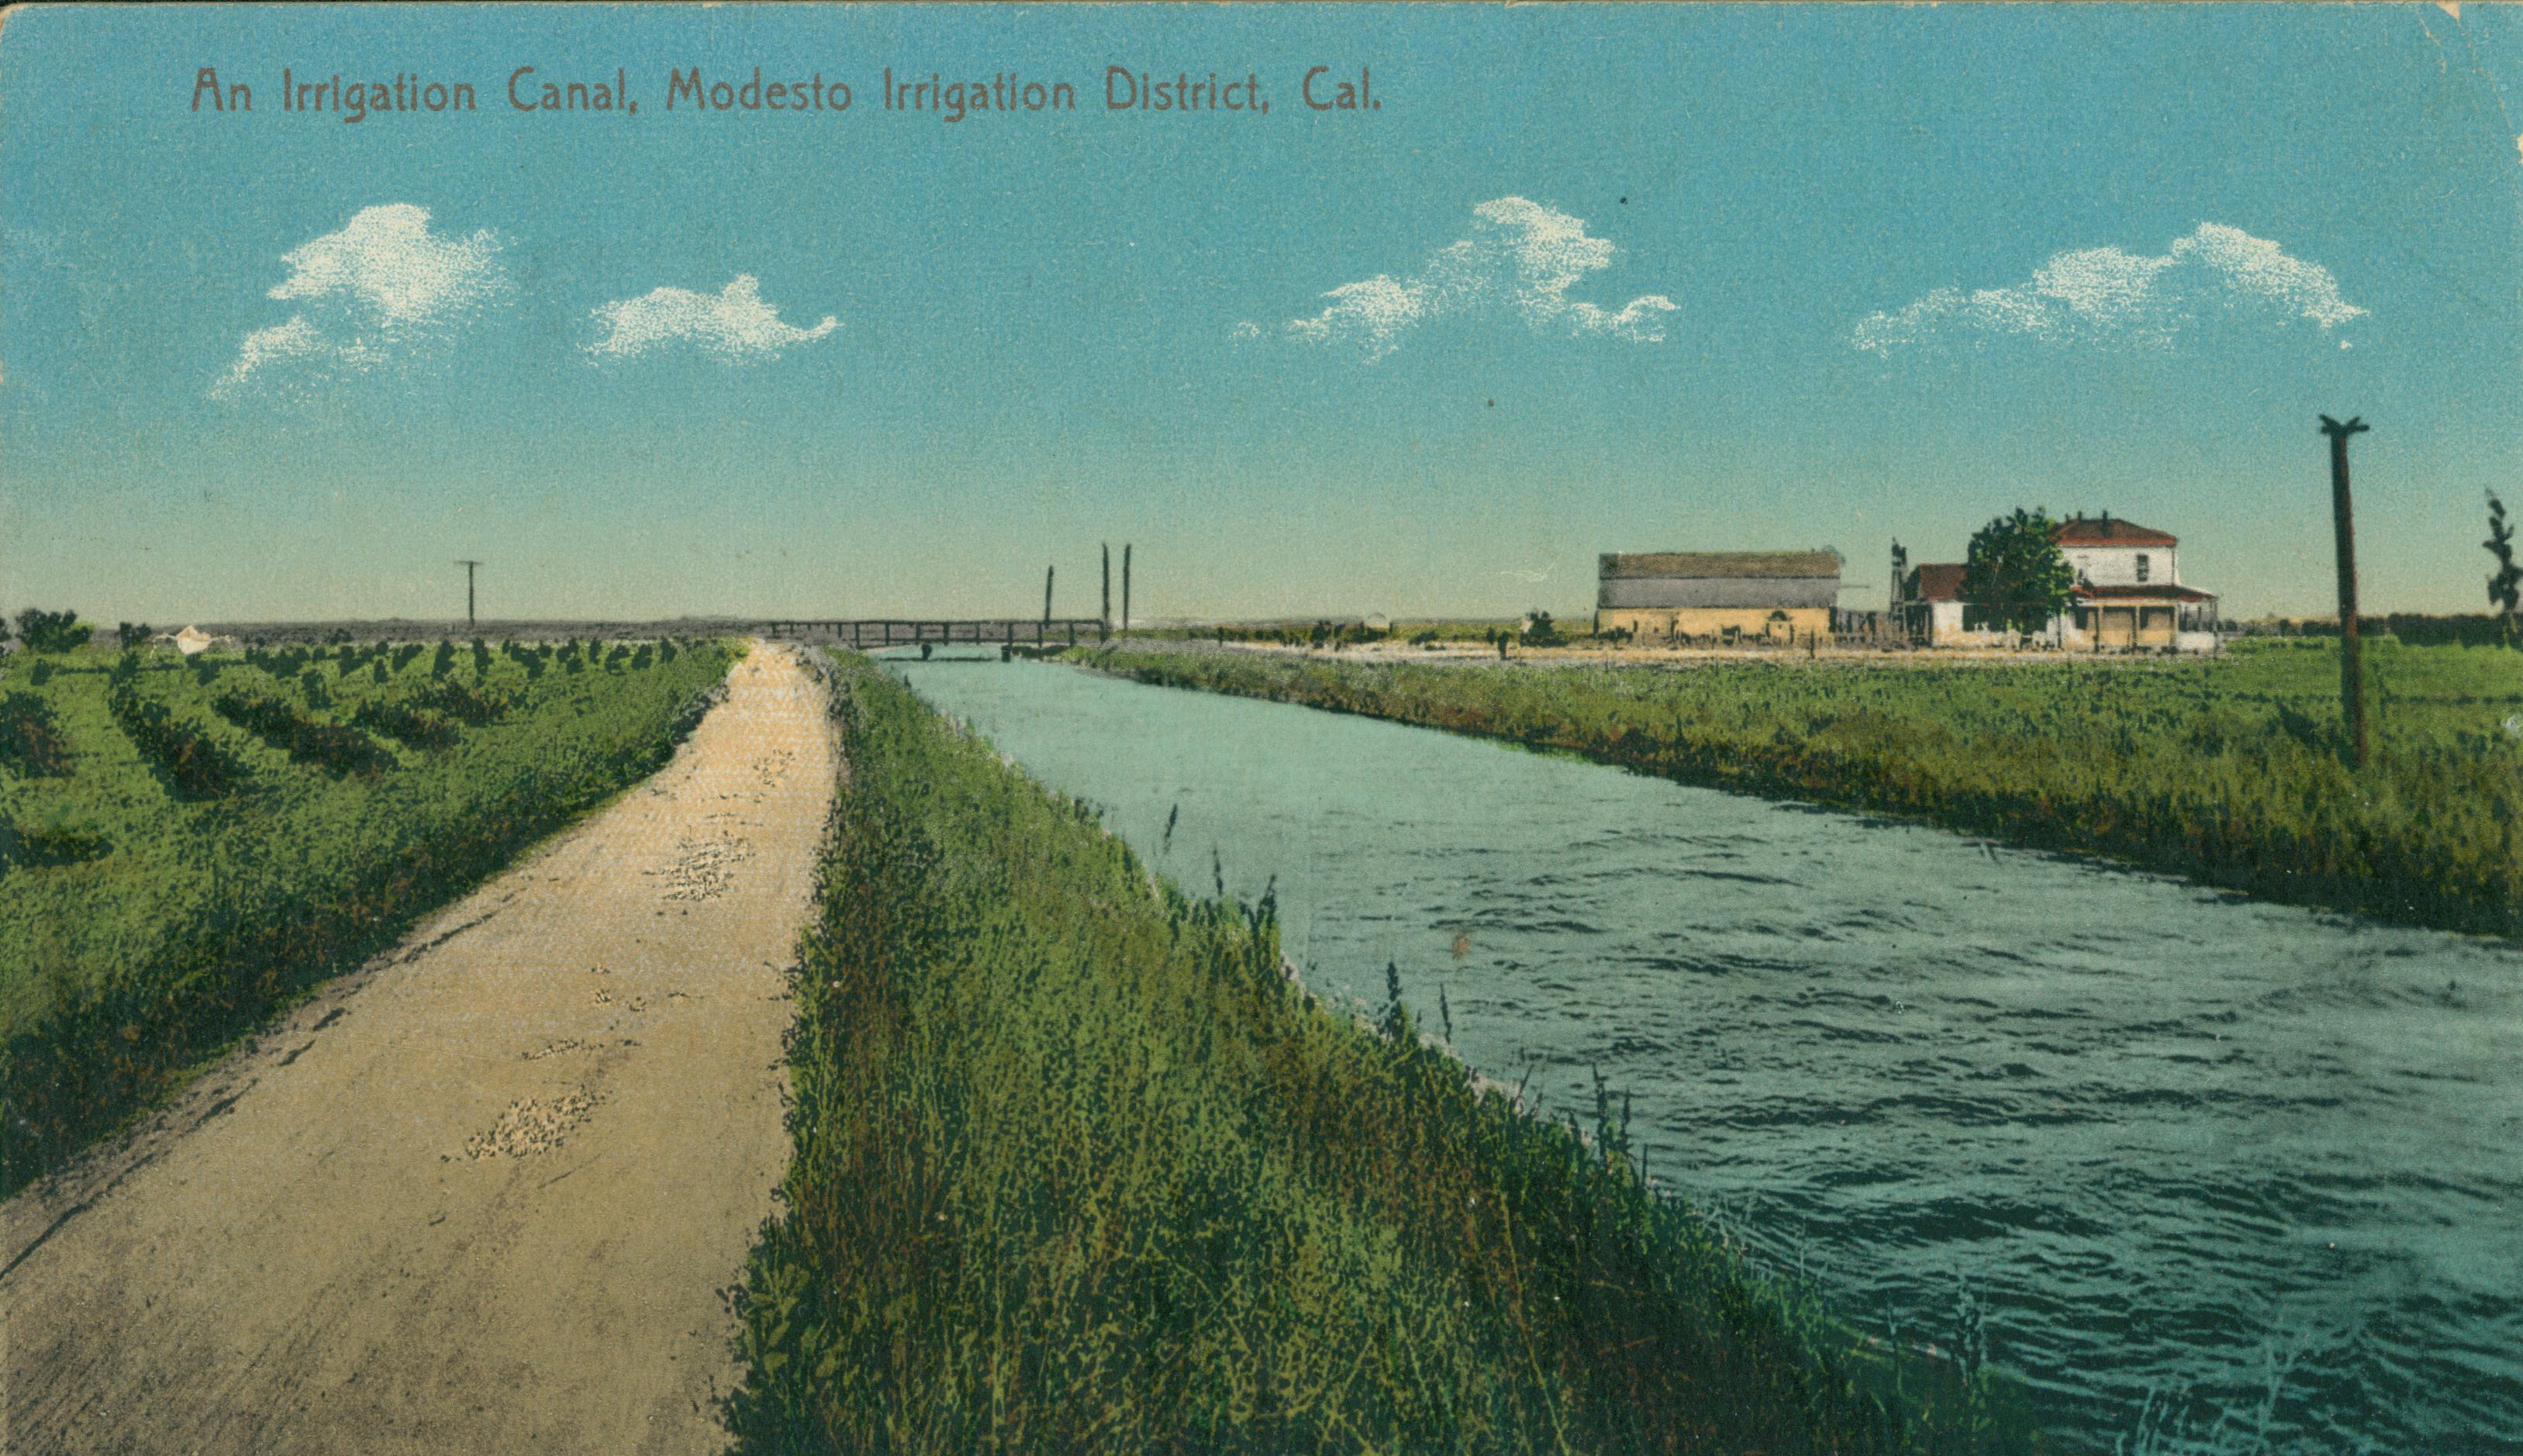 Shows an irrigation canal with a road to one side and farm buildings to the other